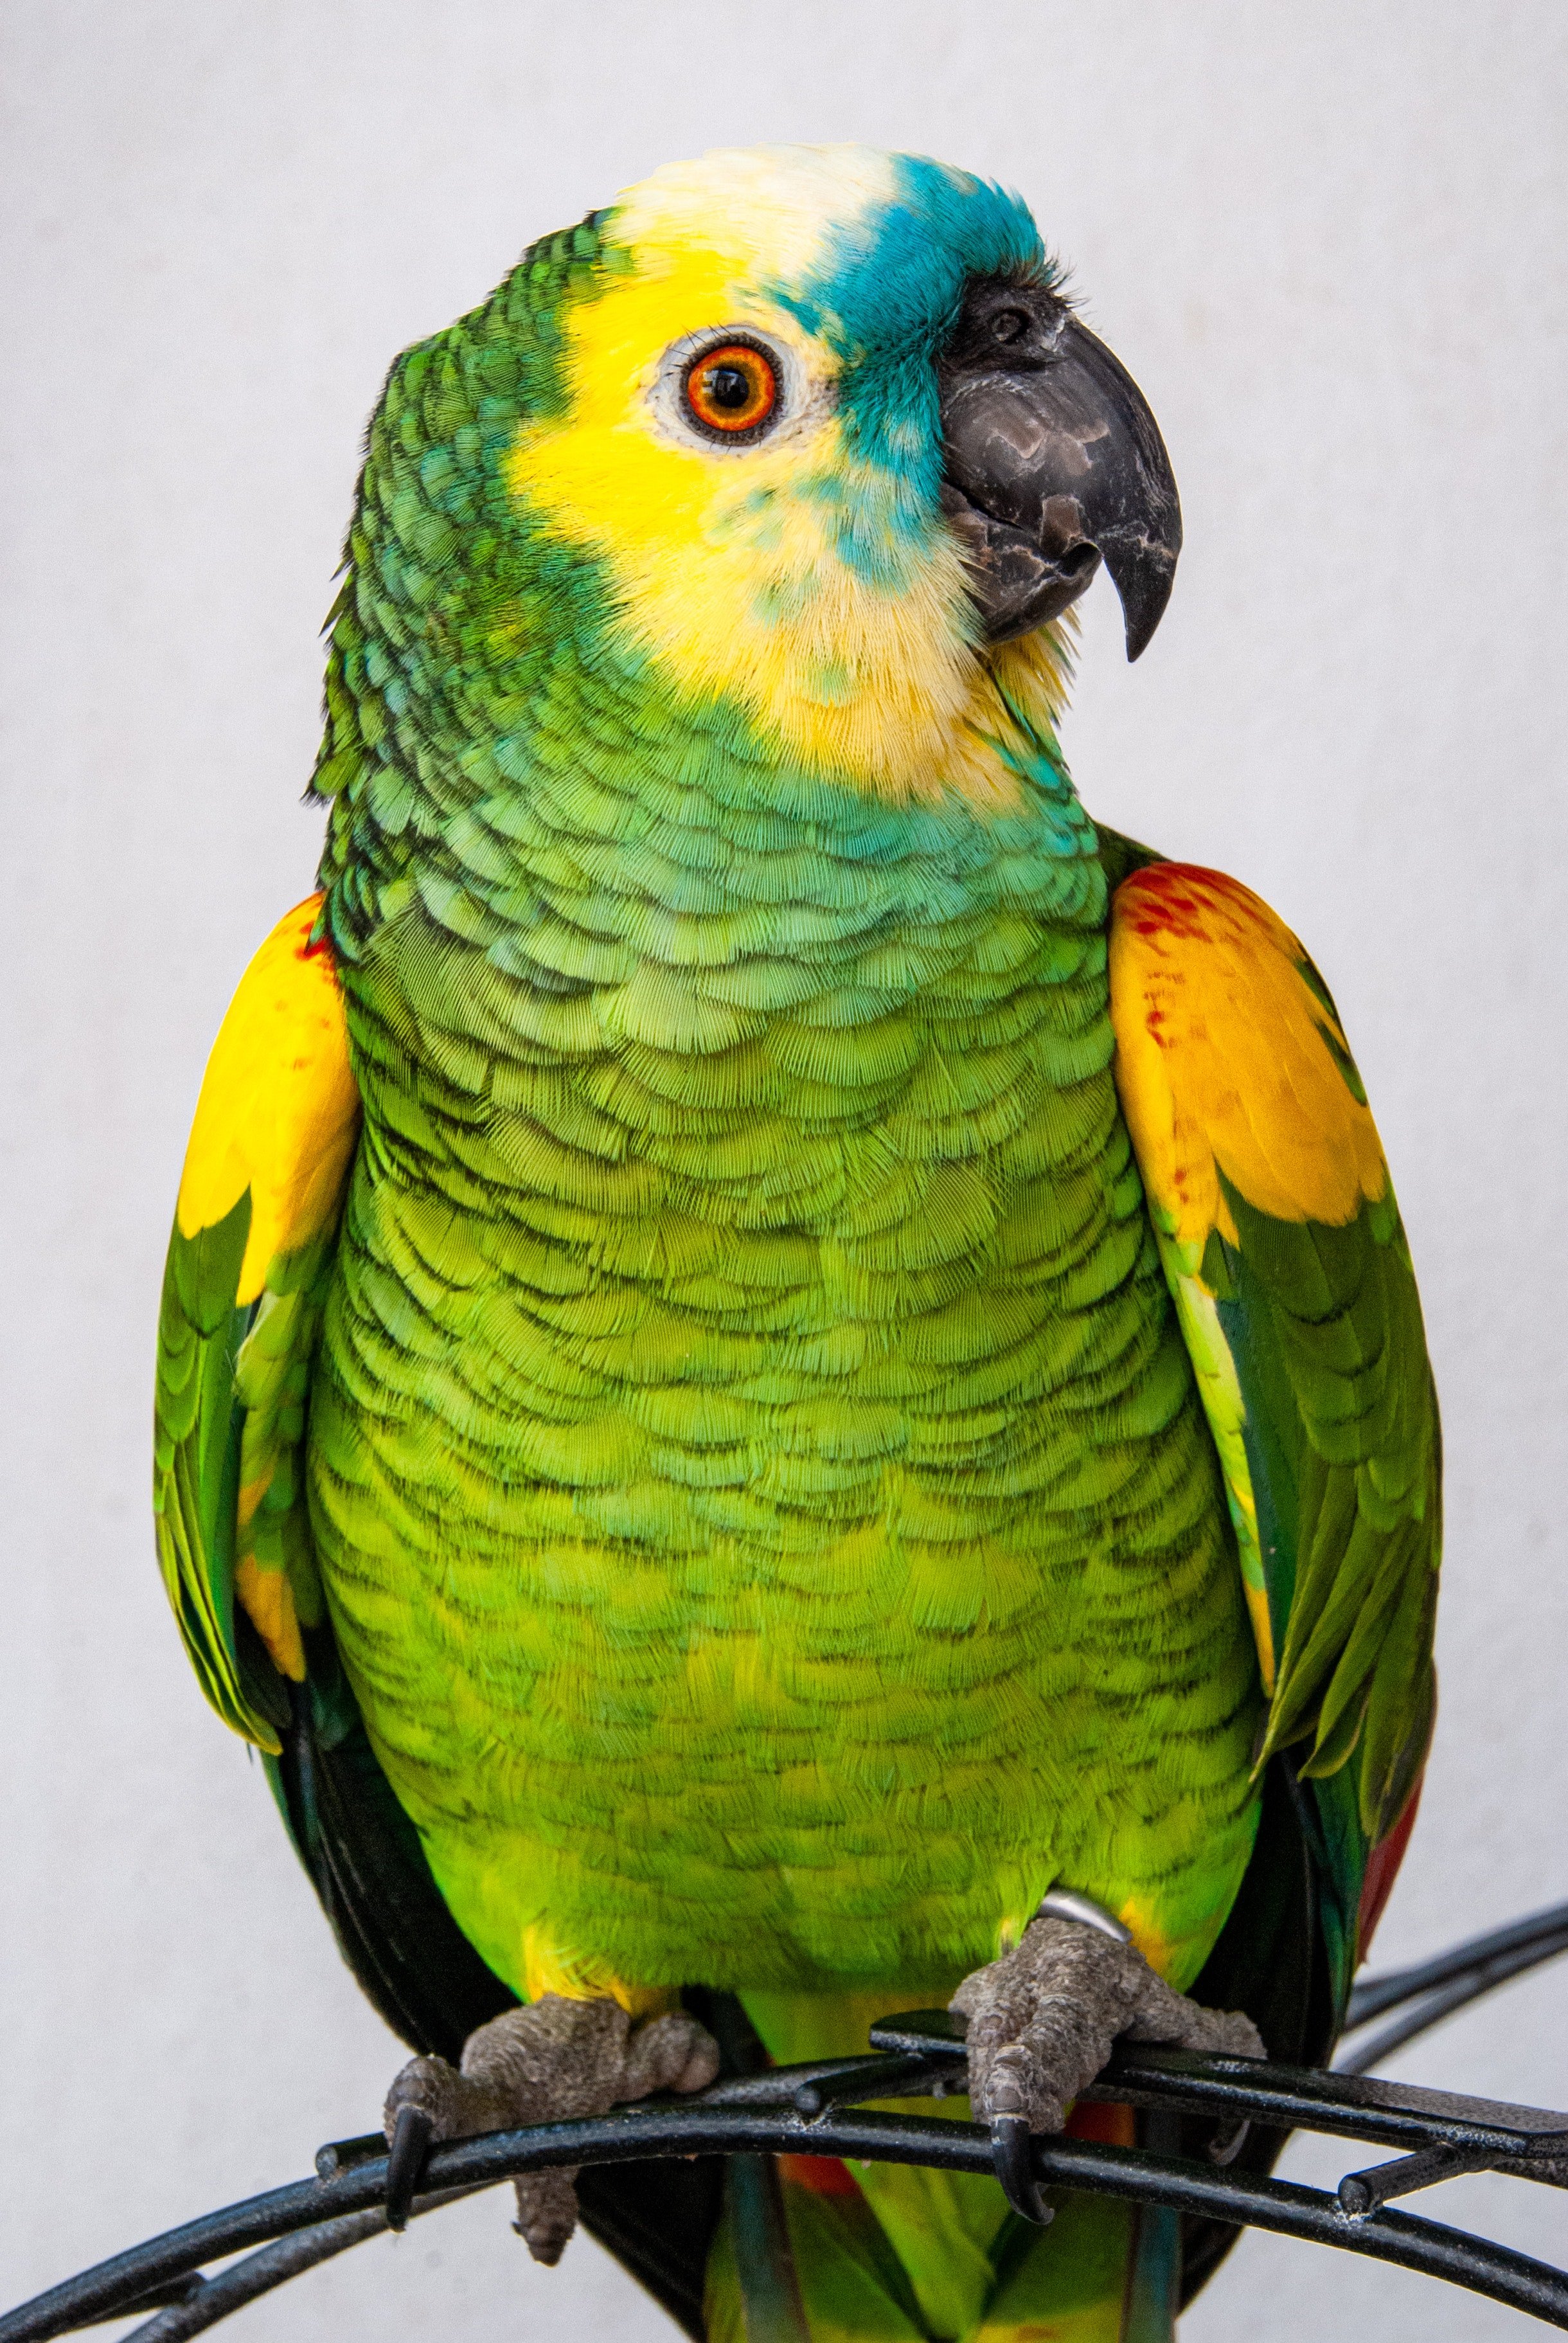 Photo of a colorful parrot. | Photo: Pexels